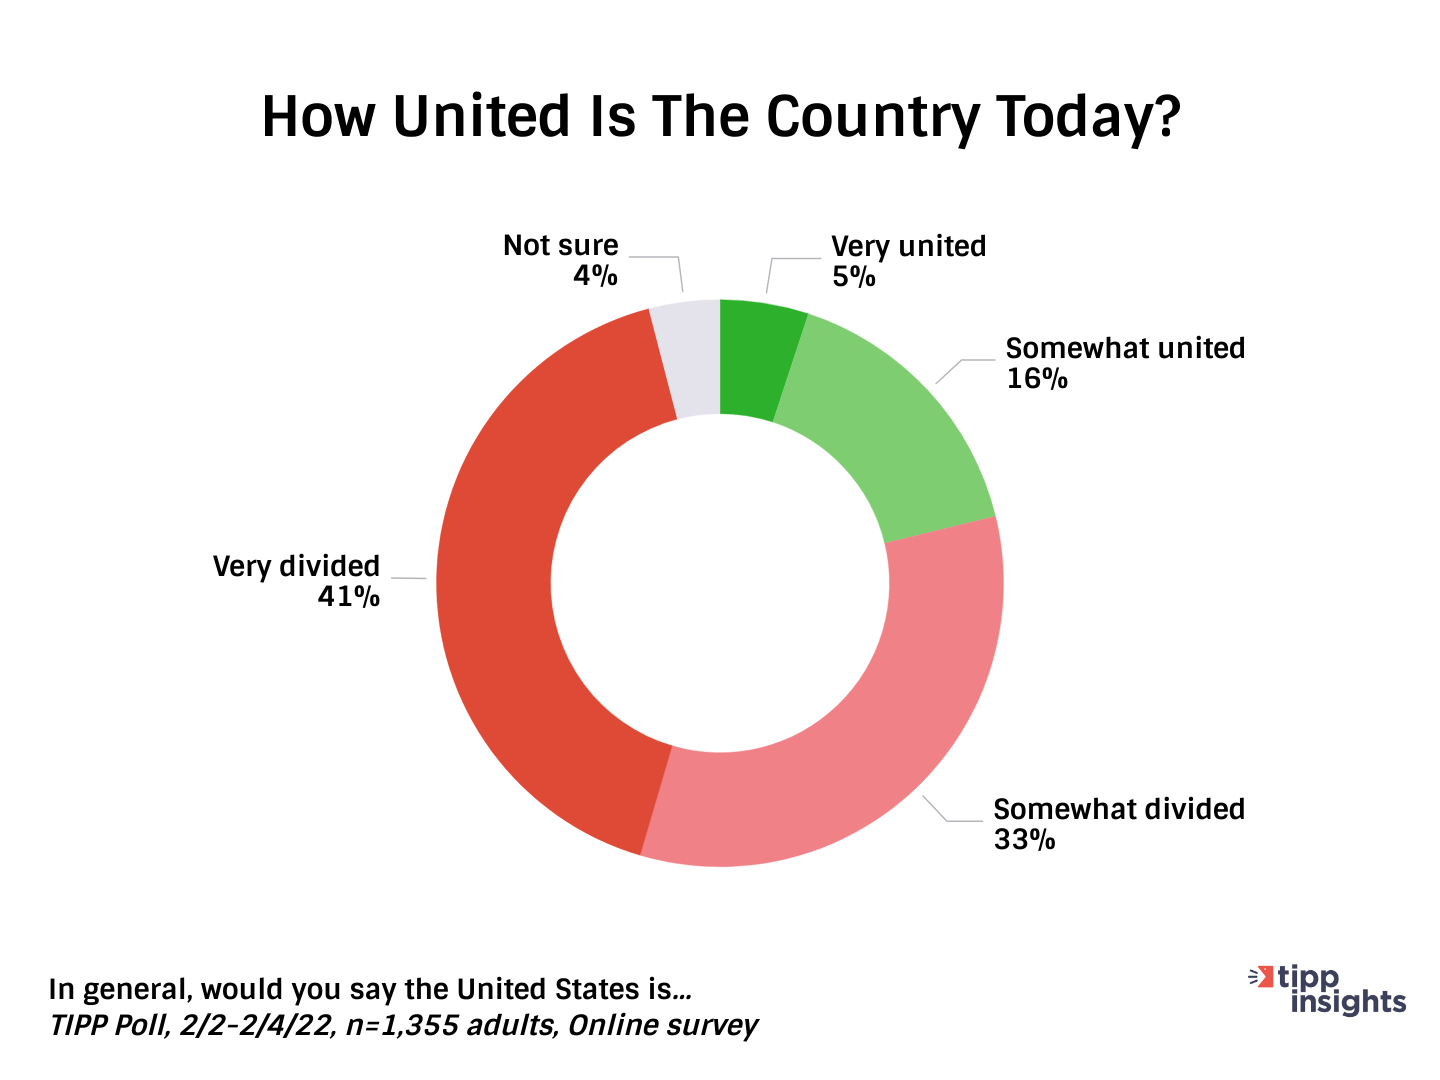 TIPP Poll Results: How united is the country (United States) today